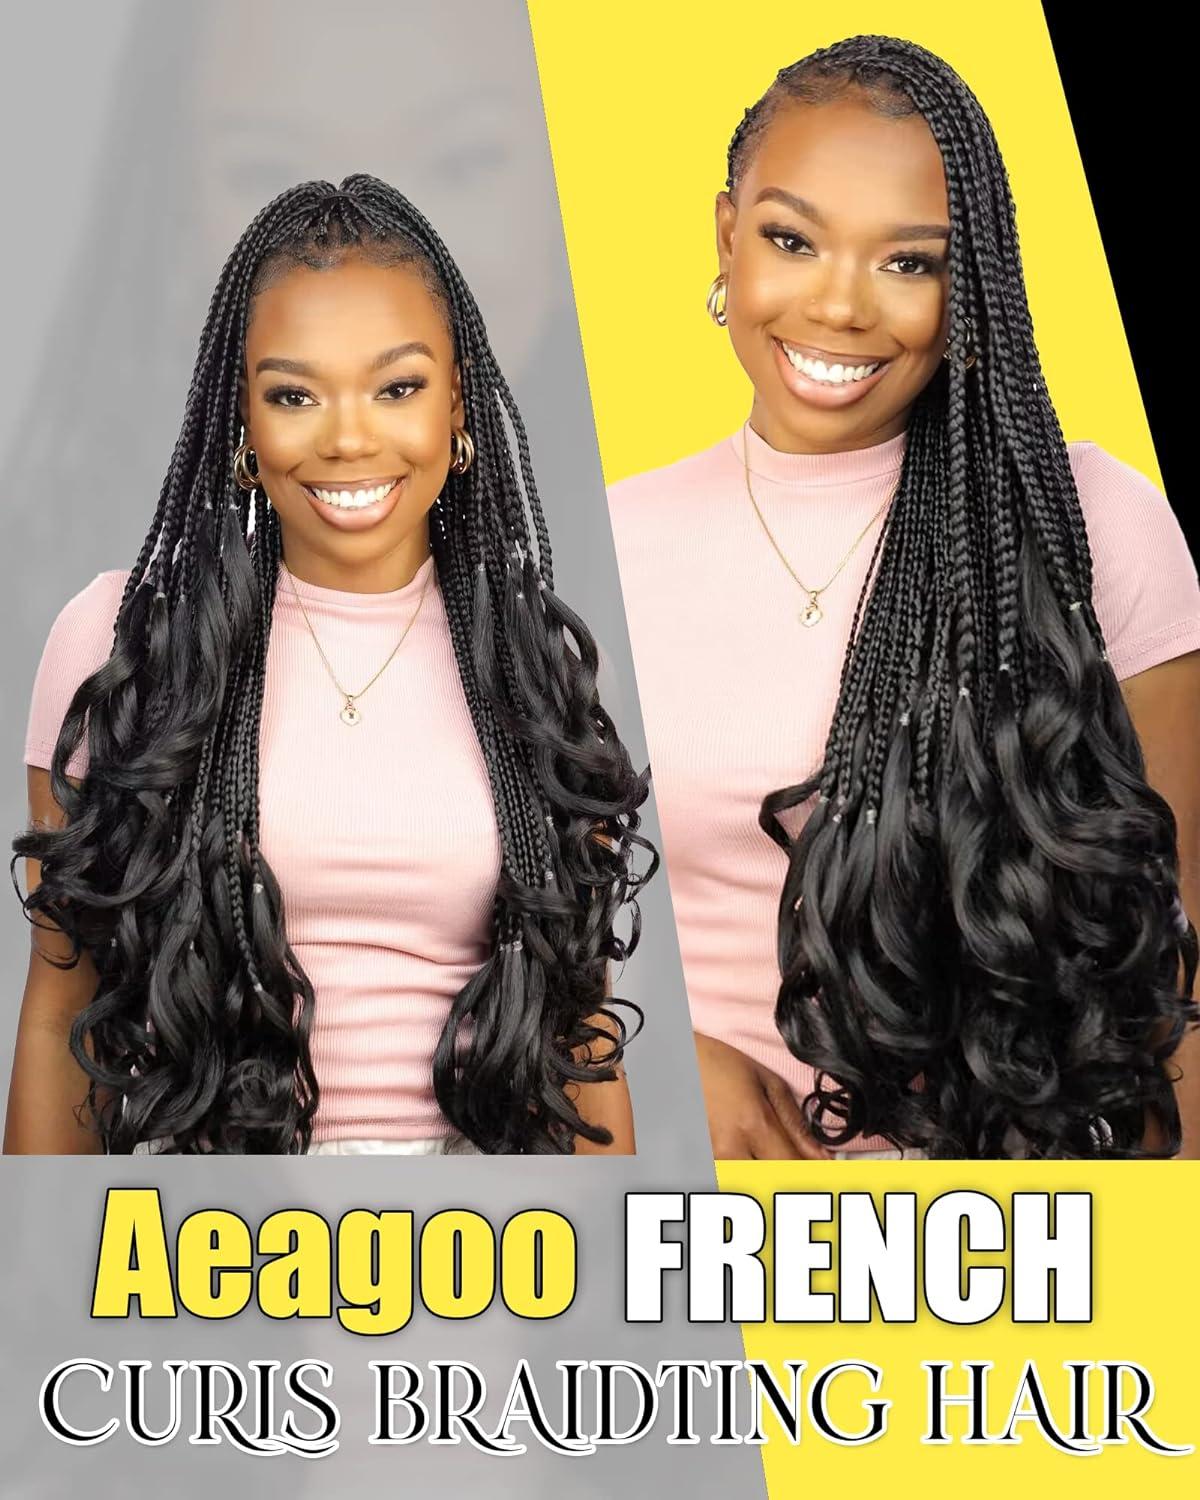 Aeagoo French Curl Braiding Hair Pre Stretched 20 Inch 8 Packs Bouncy Loose  Wavy Braiding Hair Hot Water Setting Yaki Texture French Curly Braiding